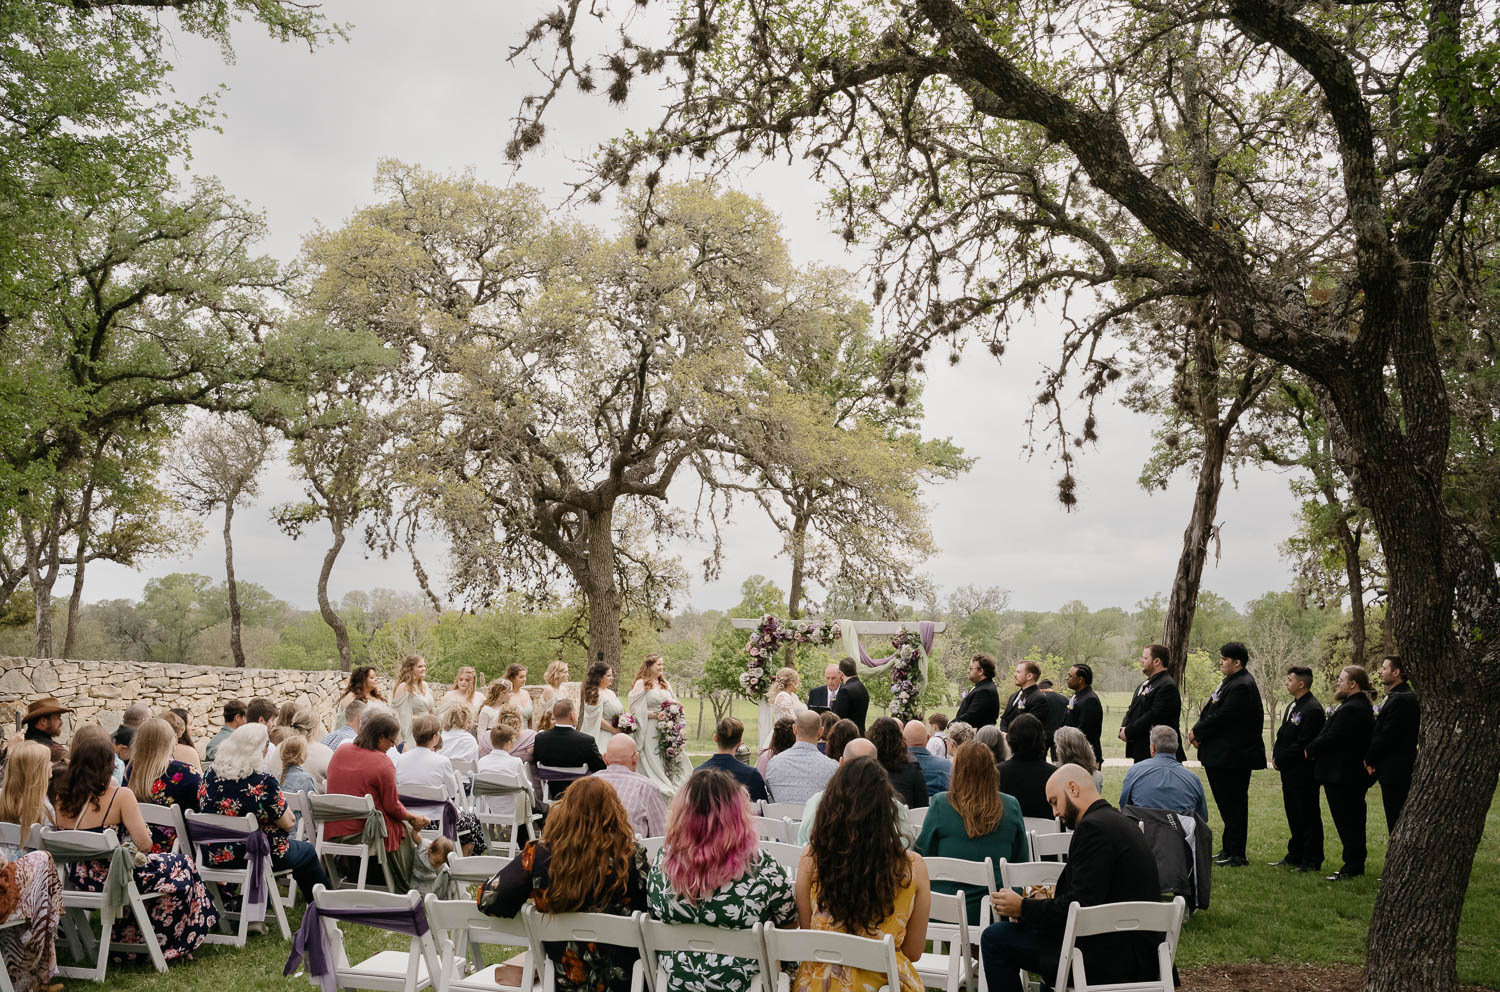 030 Eagle Dancer Ranch Boerne Hill Country Wedding+Reception Philip Thomas Photography